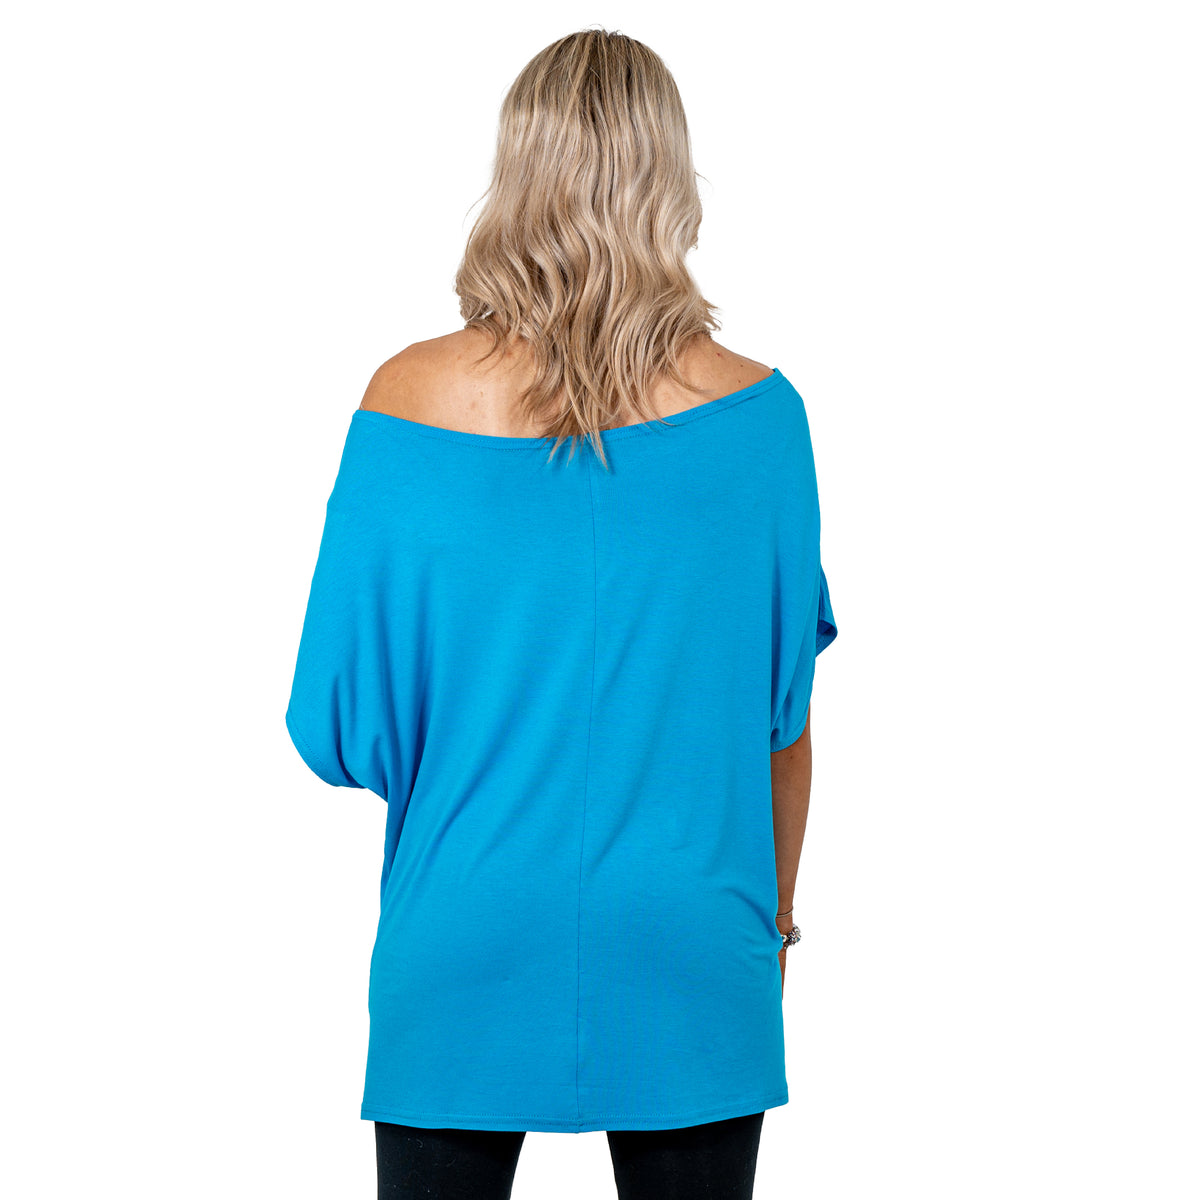 Turquoise Off The Shoulder Top